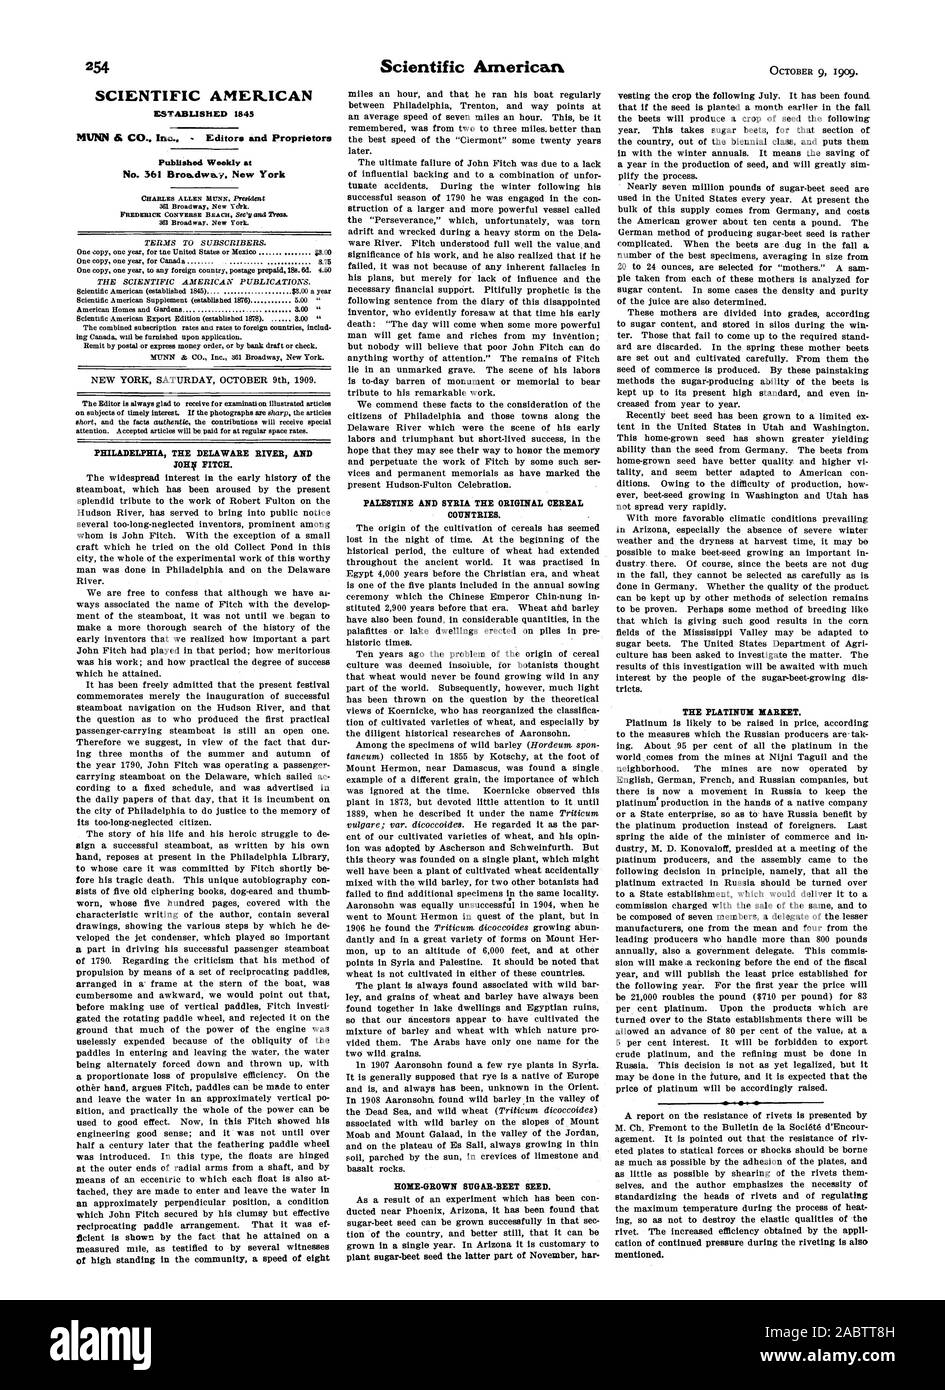 SCIENTIFIC AMERICAN ESTABLISHED 1845 Published Weekly at No. 361 Broadway. New York TERMS TO SUBSCRIBERS. THE SCIENTIFIC AMERICAN PUBLICATIONS PHILADELPHIA THE DELAWARE RIVER AND JOHV PITCH. of high standing in the community a speed of eight PALESTINE AND SYRIA THE ORIGINAL CEREAL COUNTRIES. HONE-GROWN SUGAR-BEET SEED. THE PLATINUM MARKET., -1909-10-09 Stock Photo